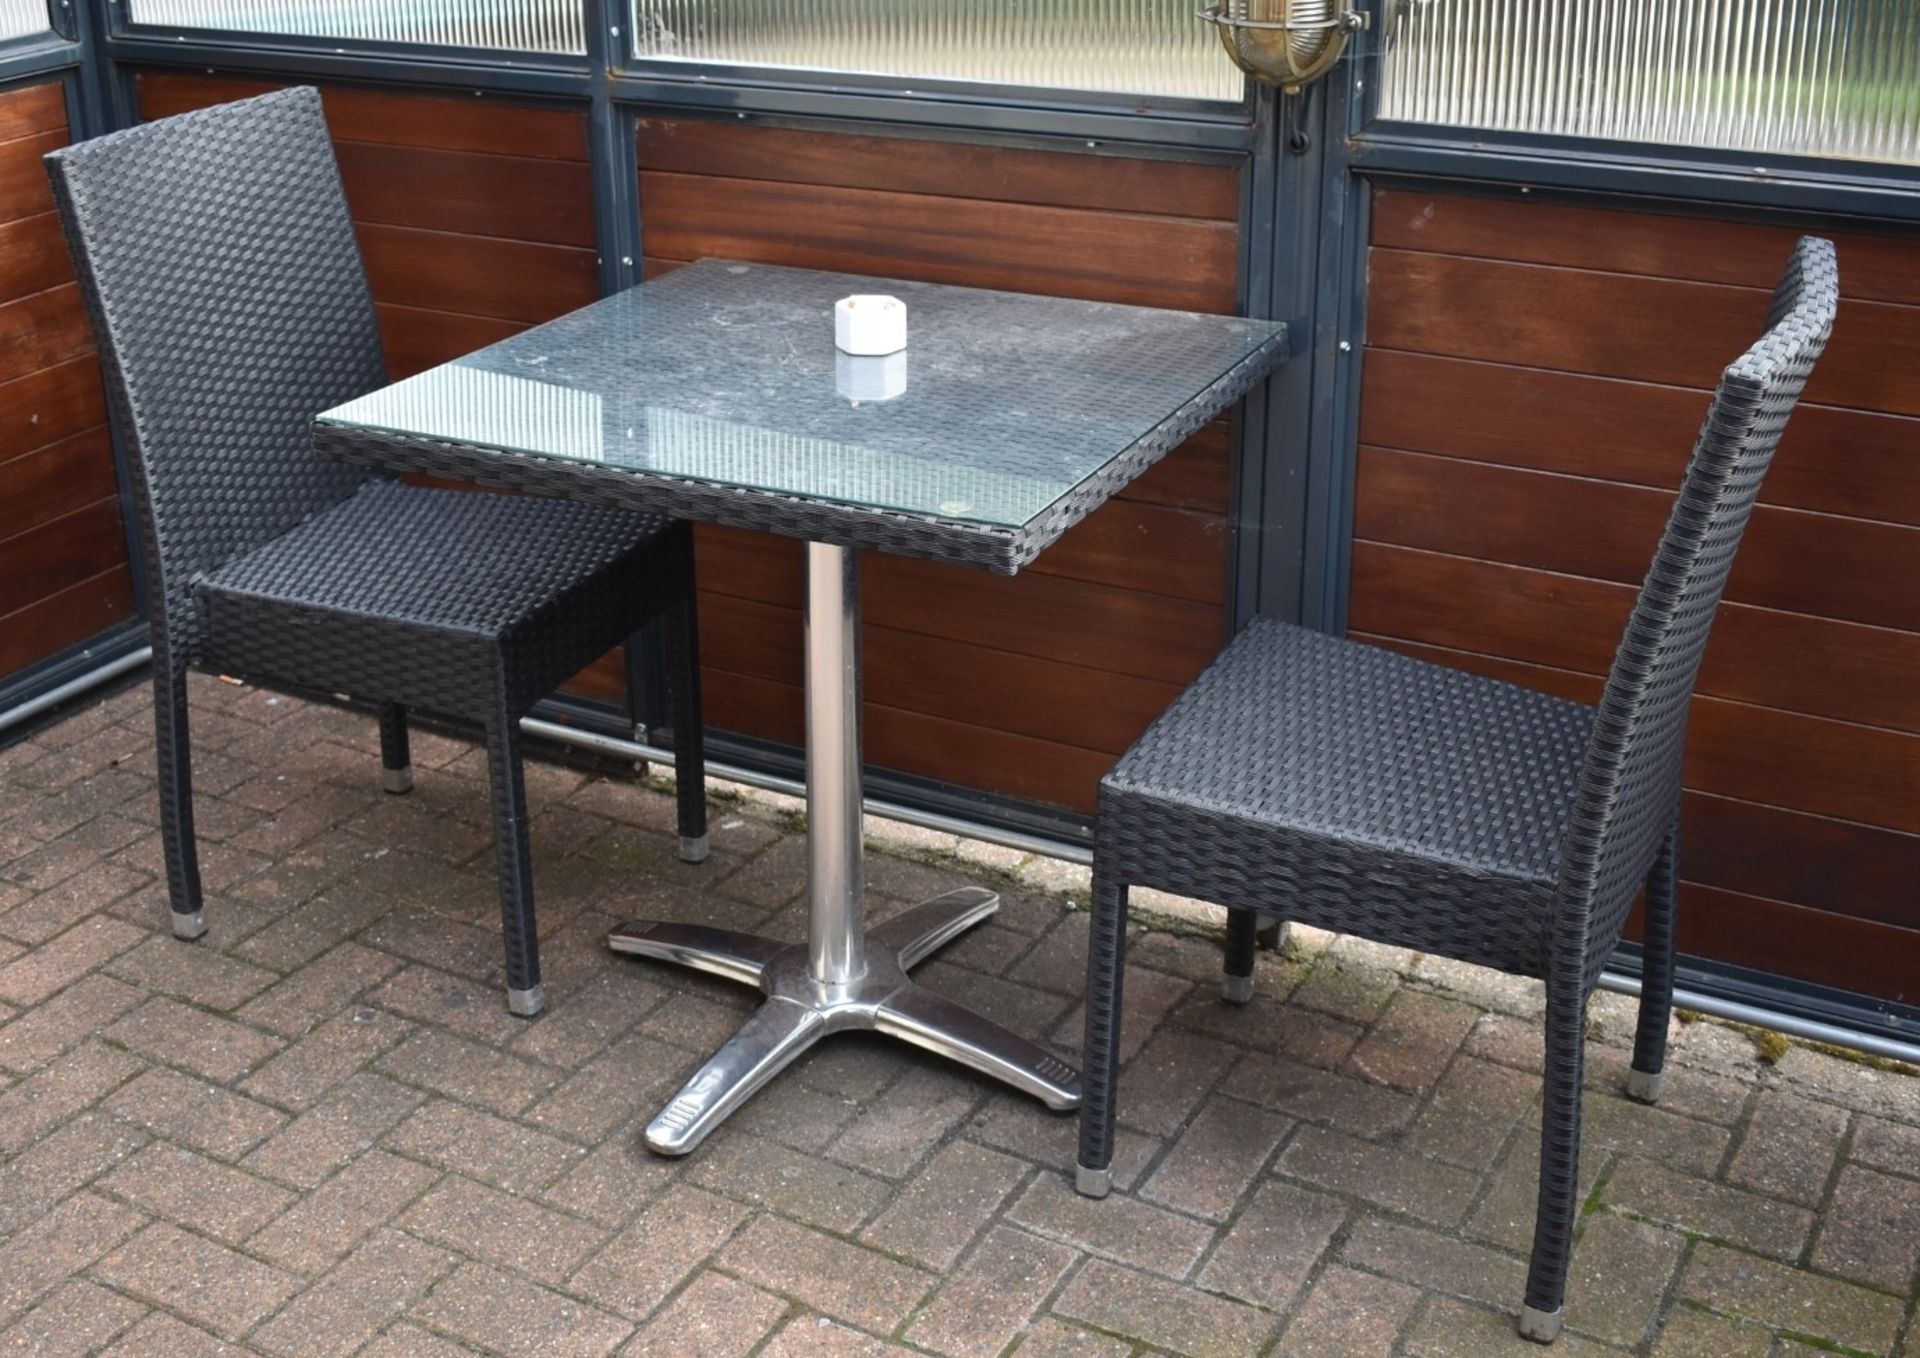 1 x Rattan Garden Table and Chair Set - Includes 1 x Square Rattan Table With Chrome Base and